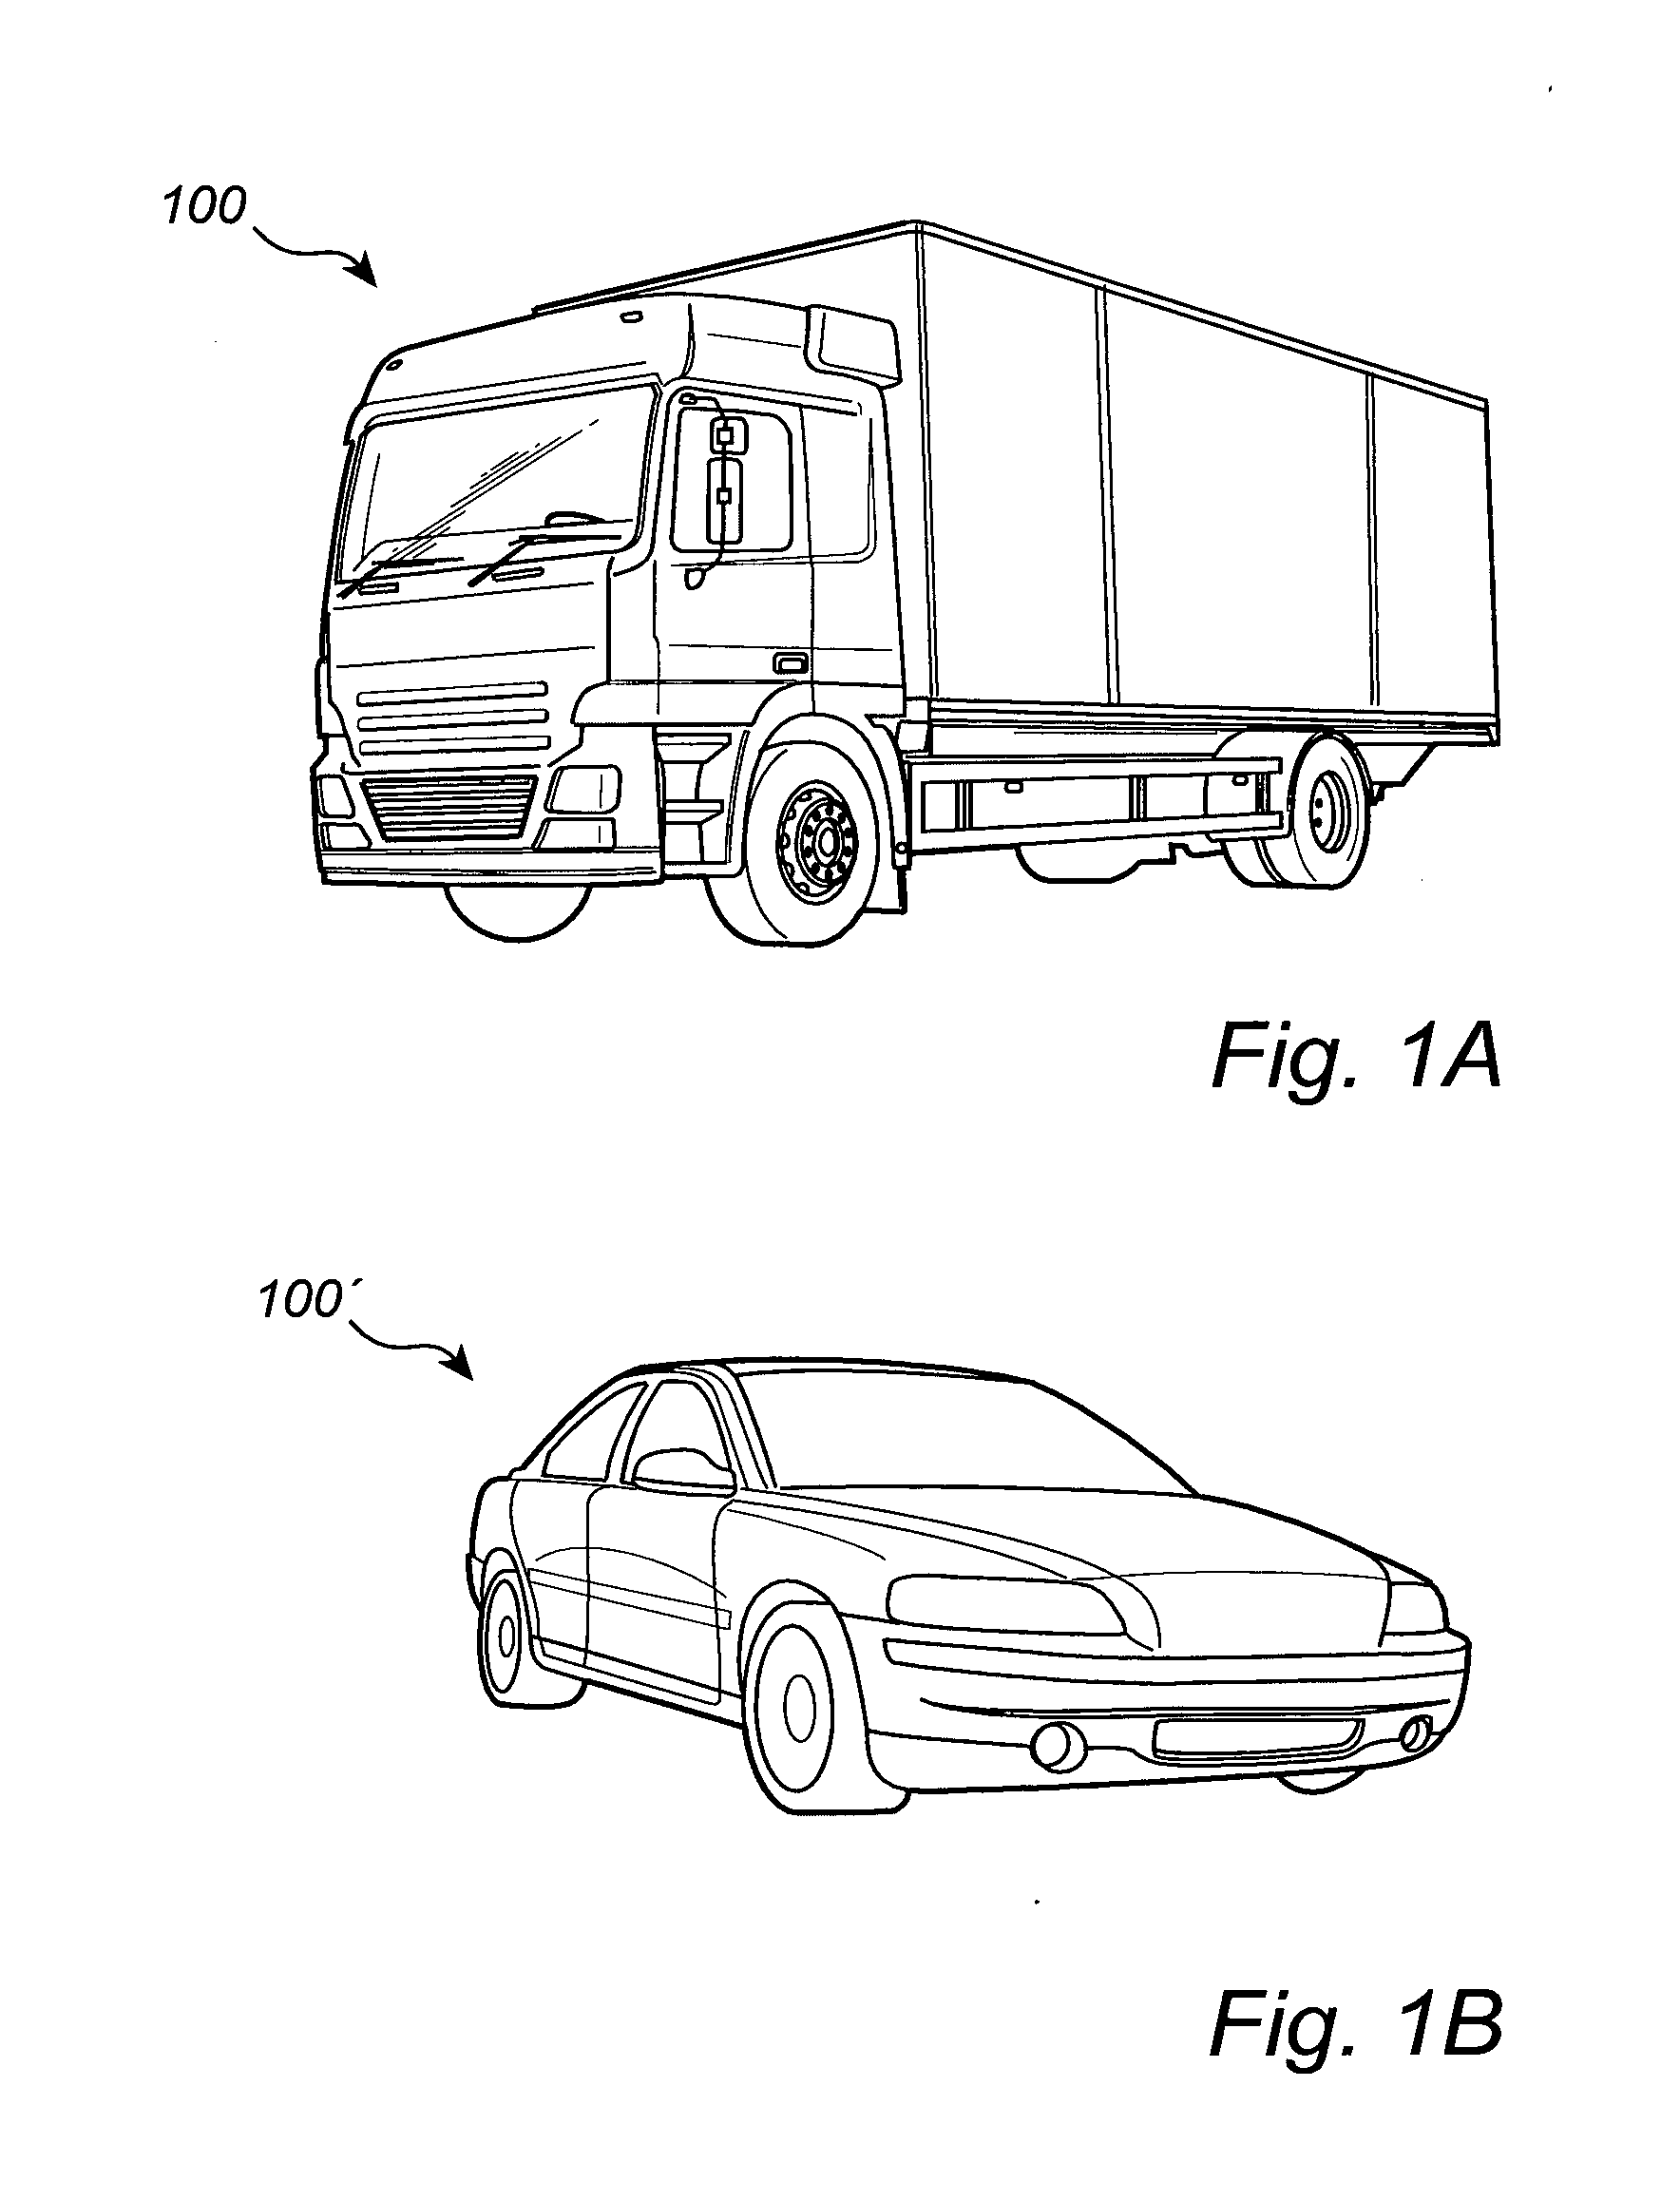 Method and system for driver assistance for a vehicle